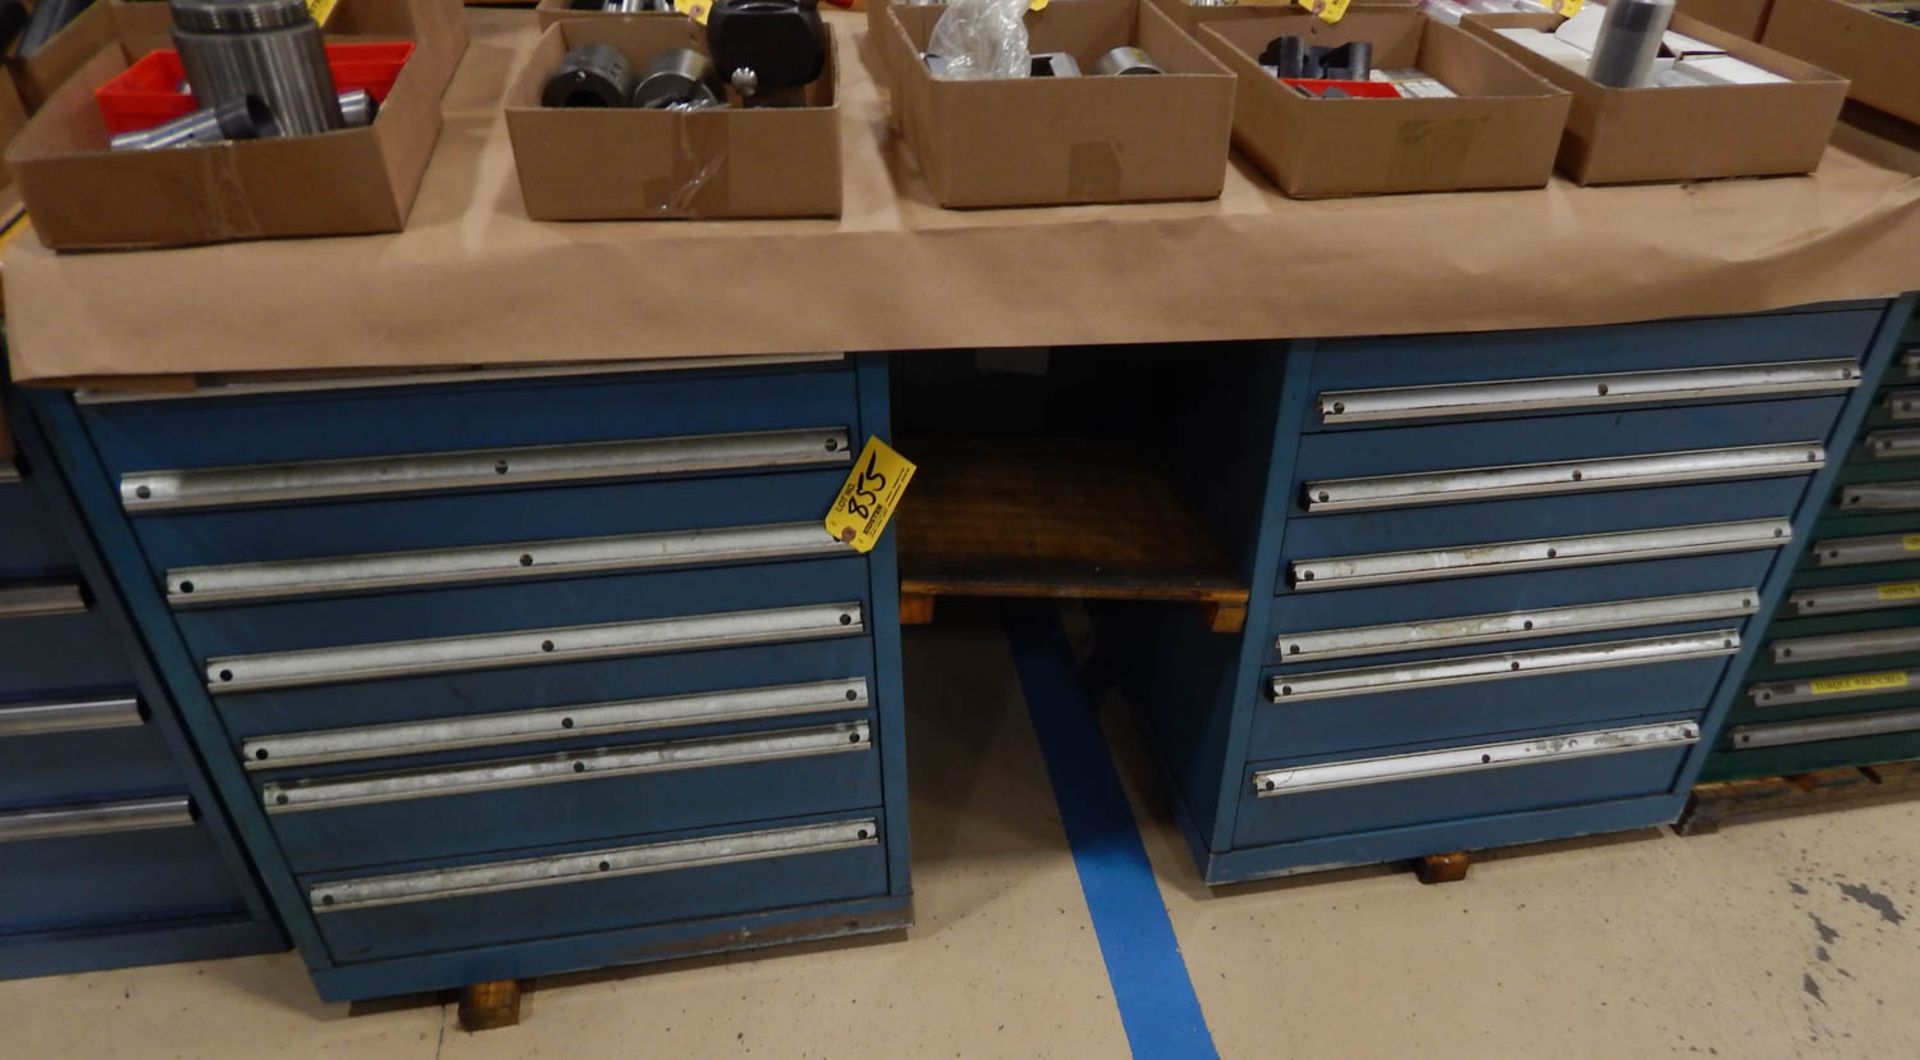 14-DRAWER WOOD TOP WORK BENCH (NO CONTENTS)